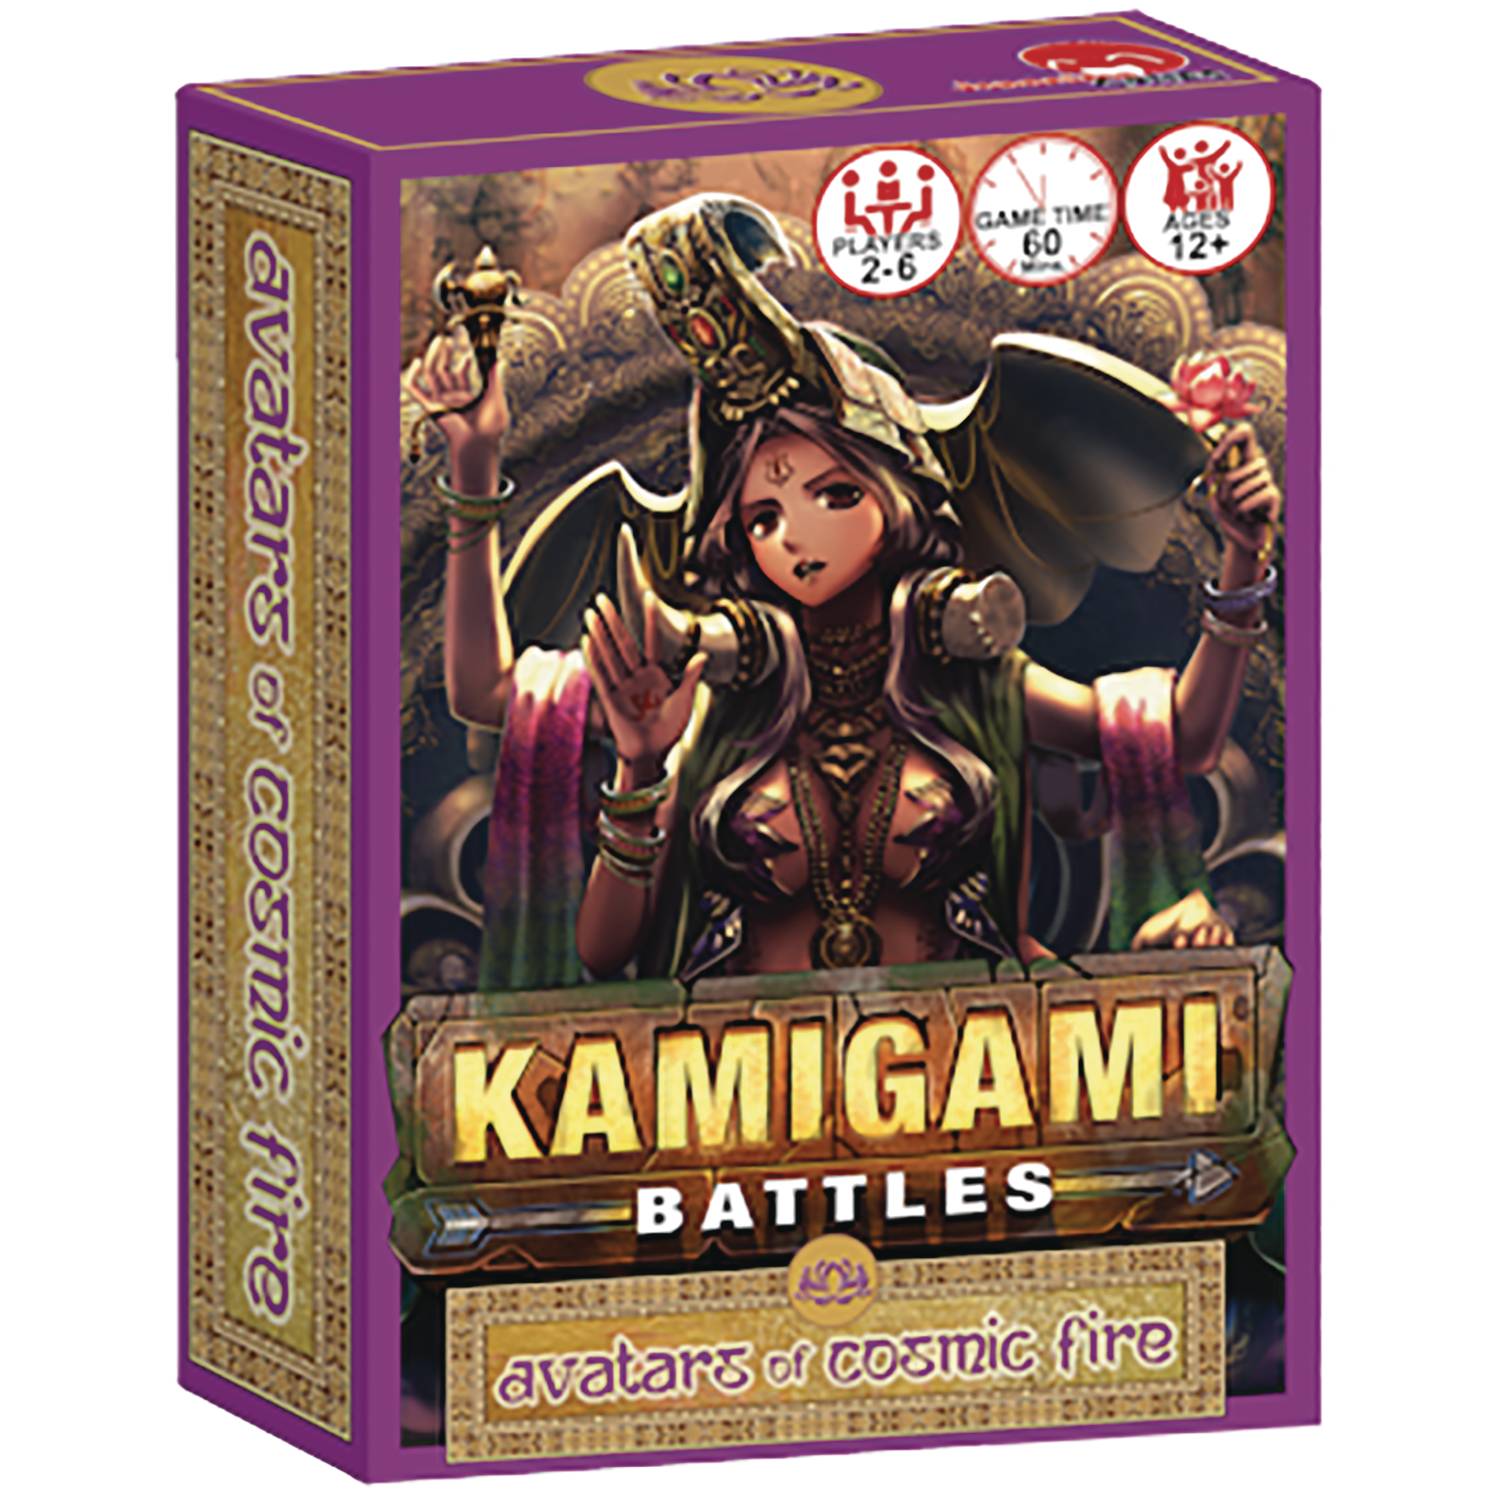 Kamigami Battles Avatars Cosmic Fire Deck Building Game Expansion